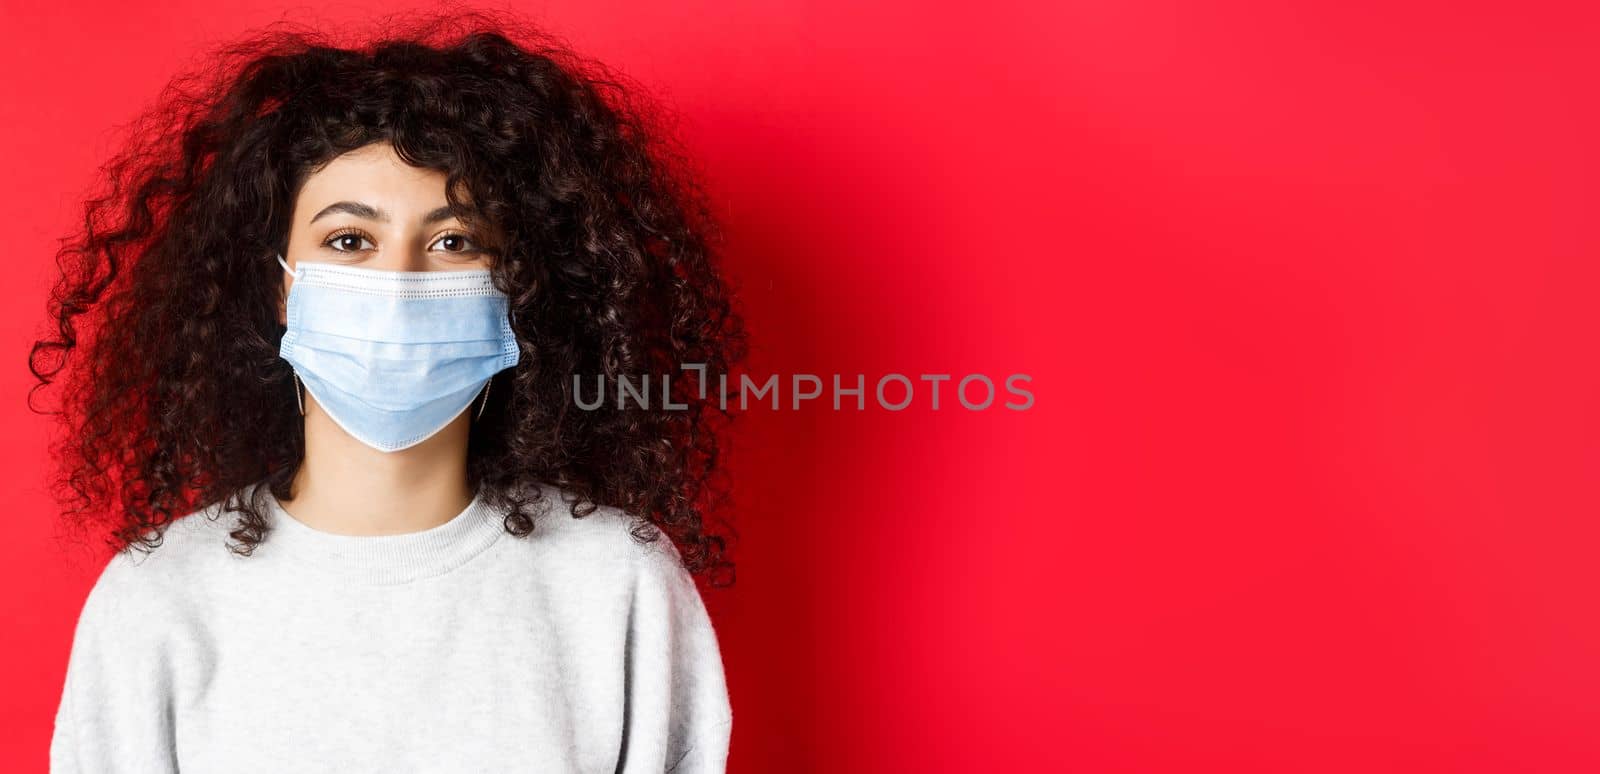 Covid-19 and pandemic concept. Close-up of modern young woman with curly hair, wearing medical mask from coronavirus, smiling at camera, red background.